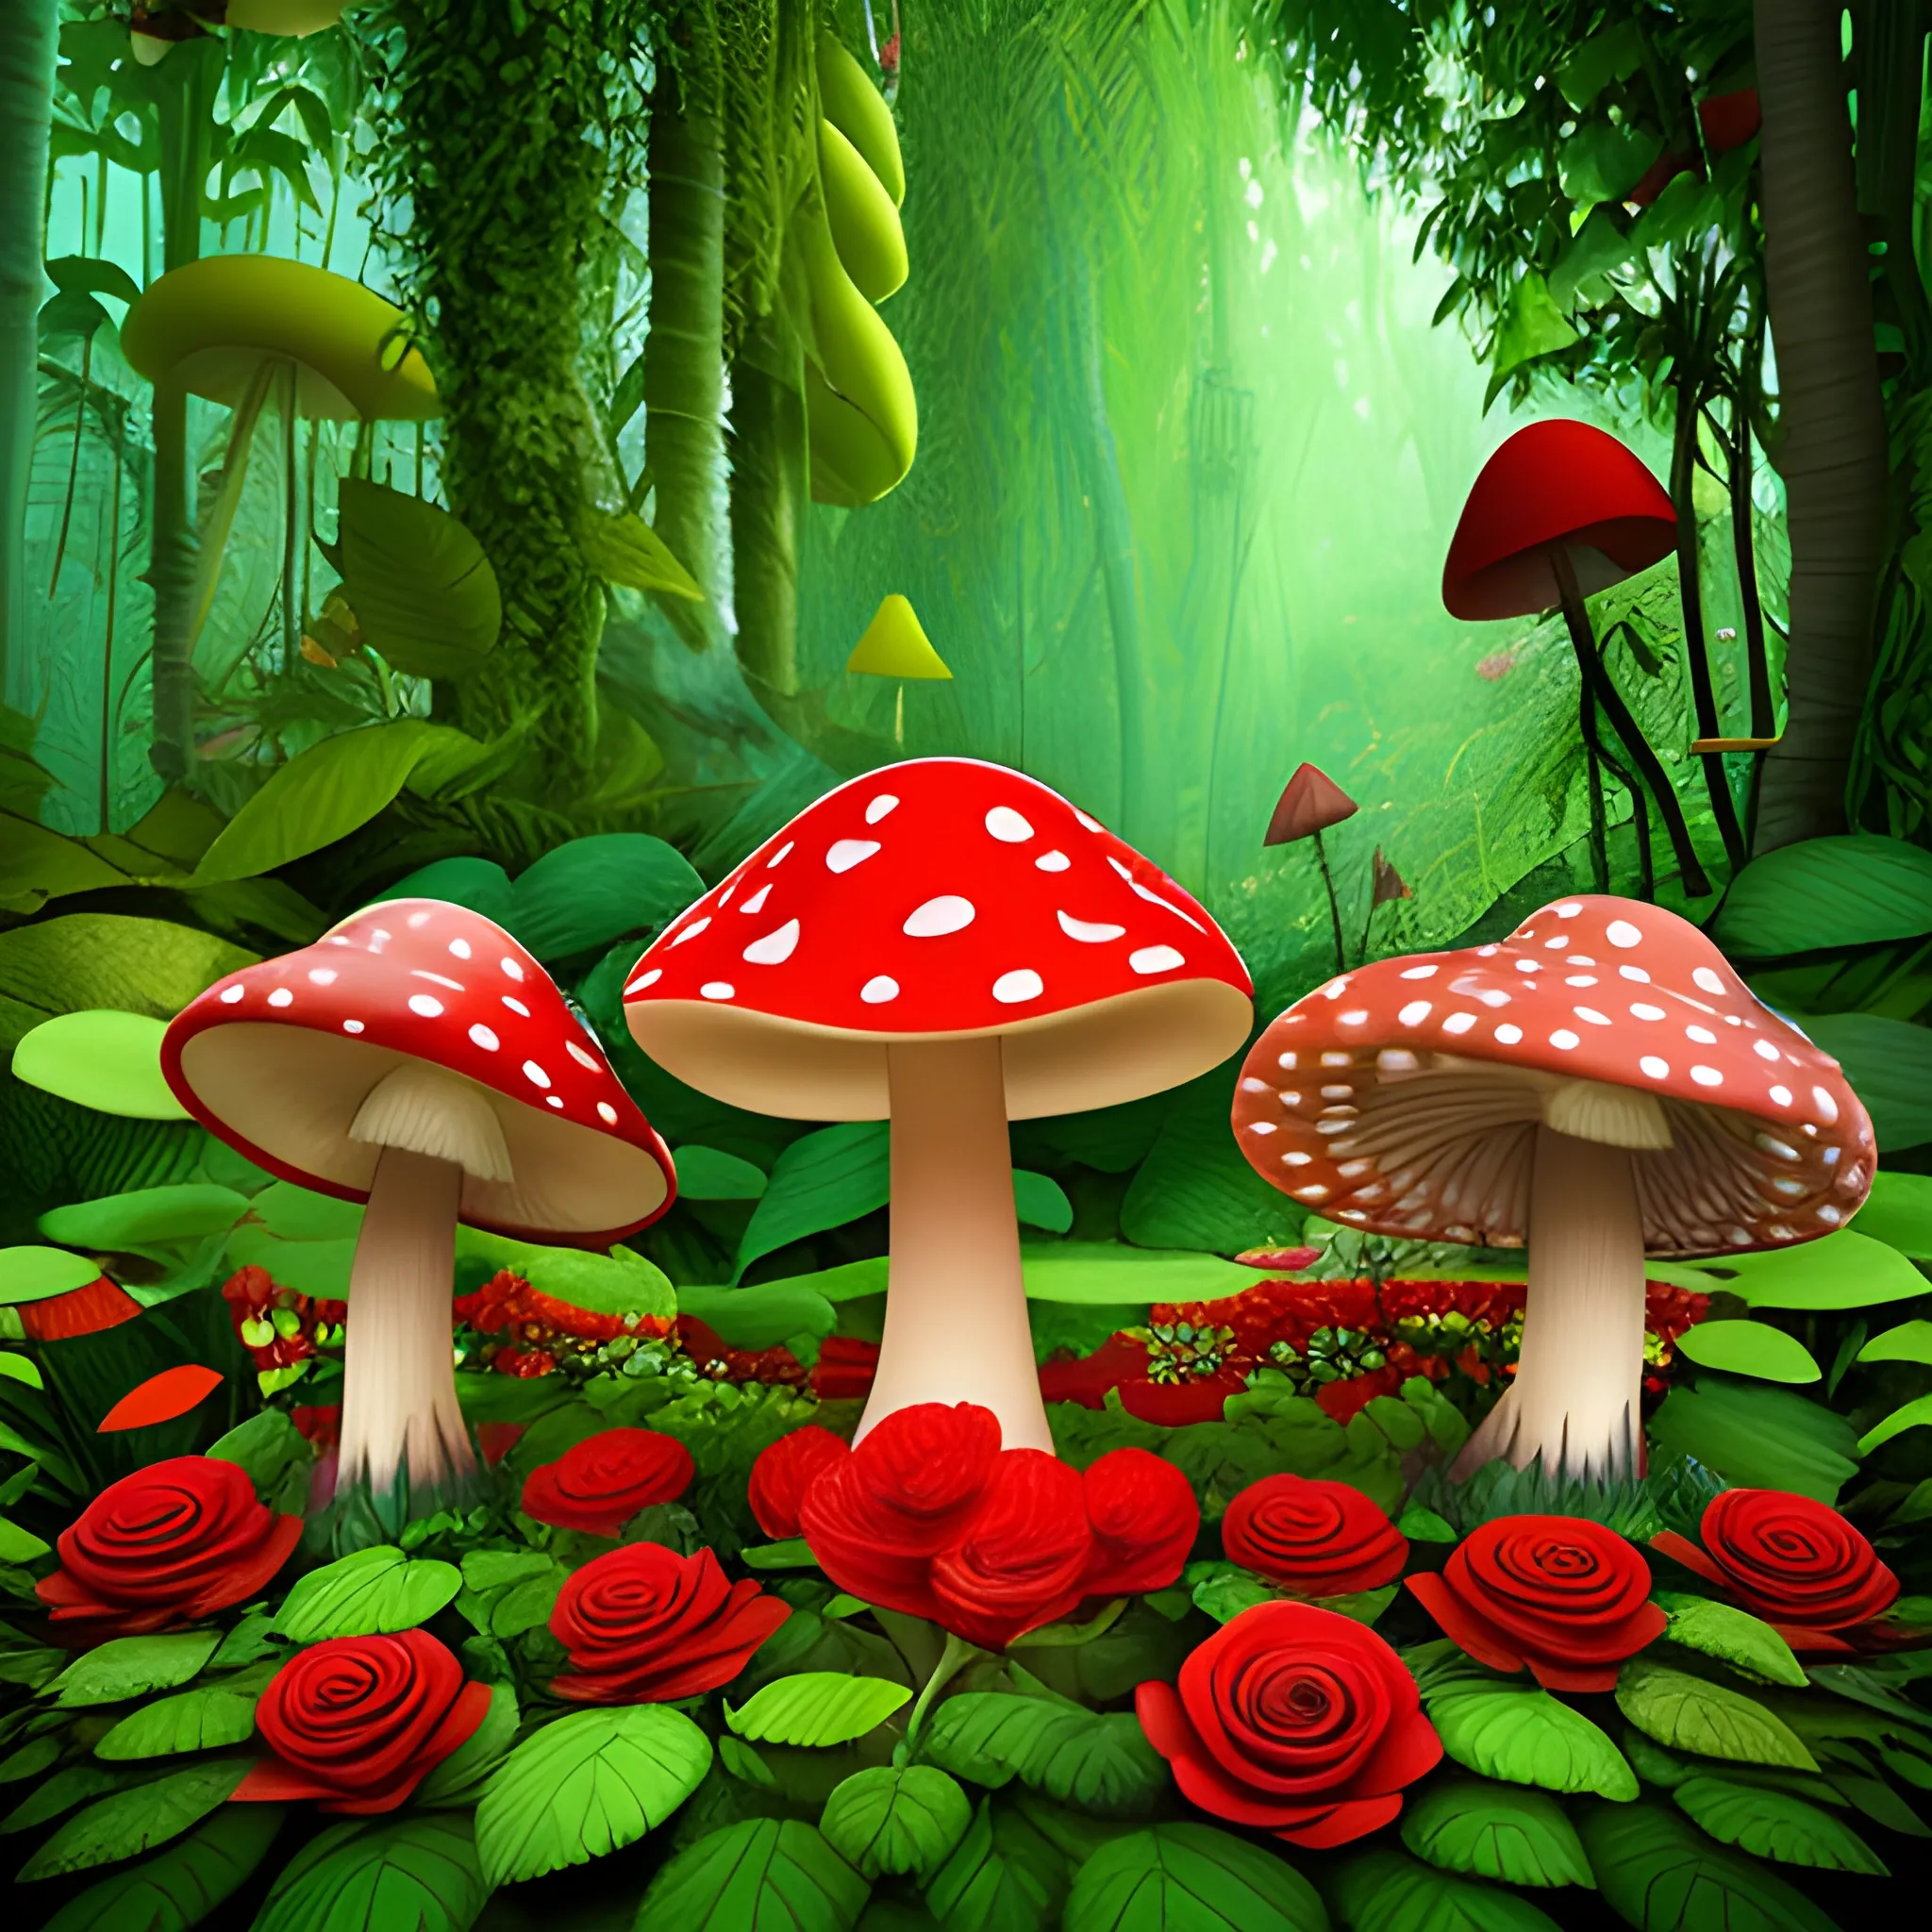 Jungle full of red roses, and flowers of the different colors and different colors mushroom,3D